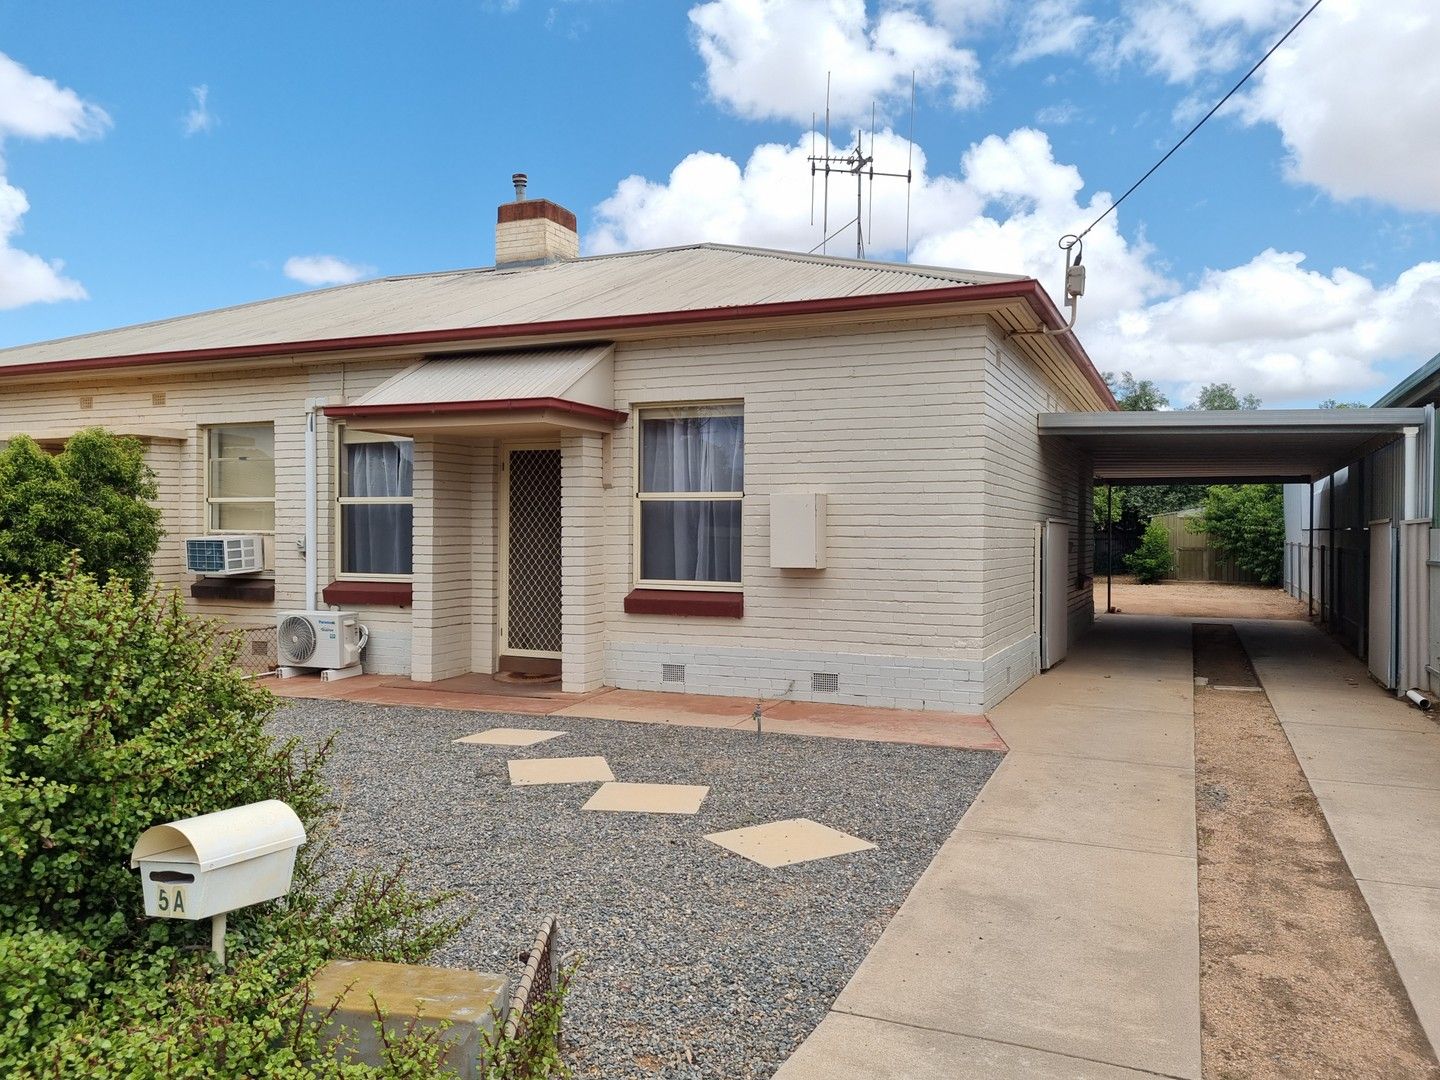 2 bedrooms House in 5A Veale Street PORT PIRIE SA, 5540